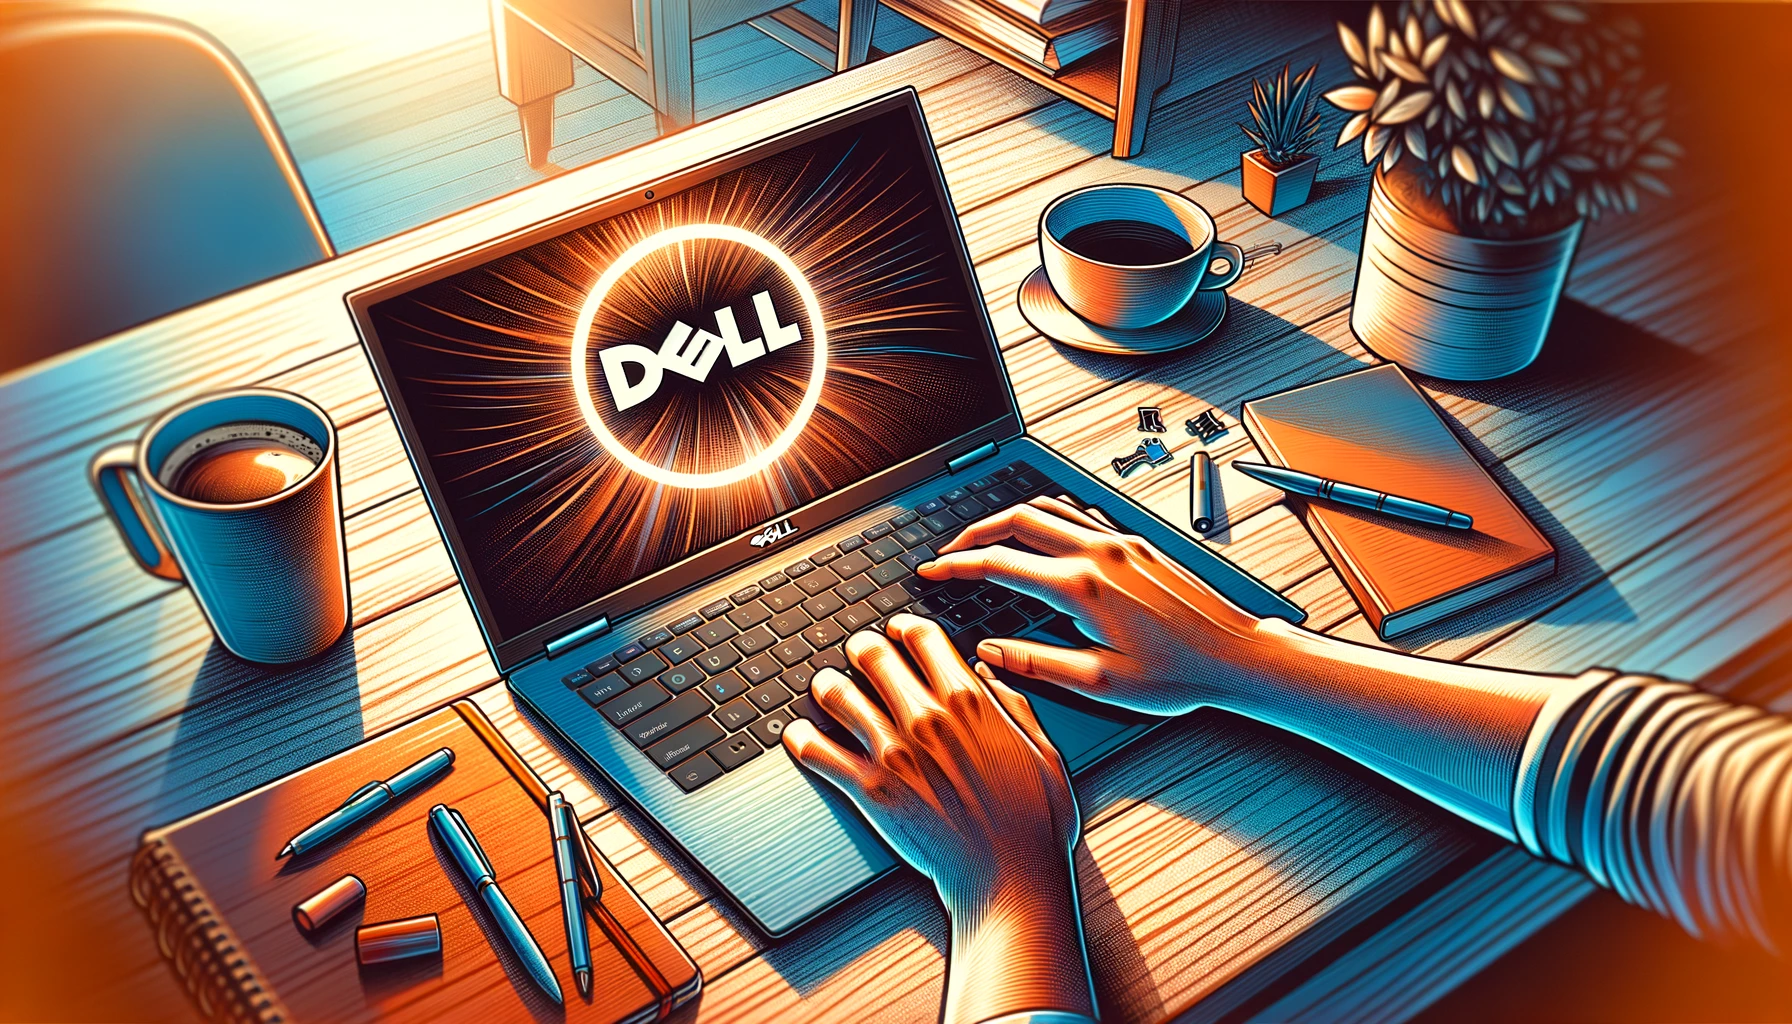 The image above presents a vibrant and engaging stock photo of a Dell Inspiron laptop, capturing a comfortable and productive home office setting with personal touches that convey warmth and creativity.